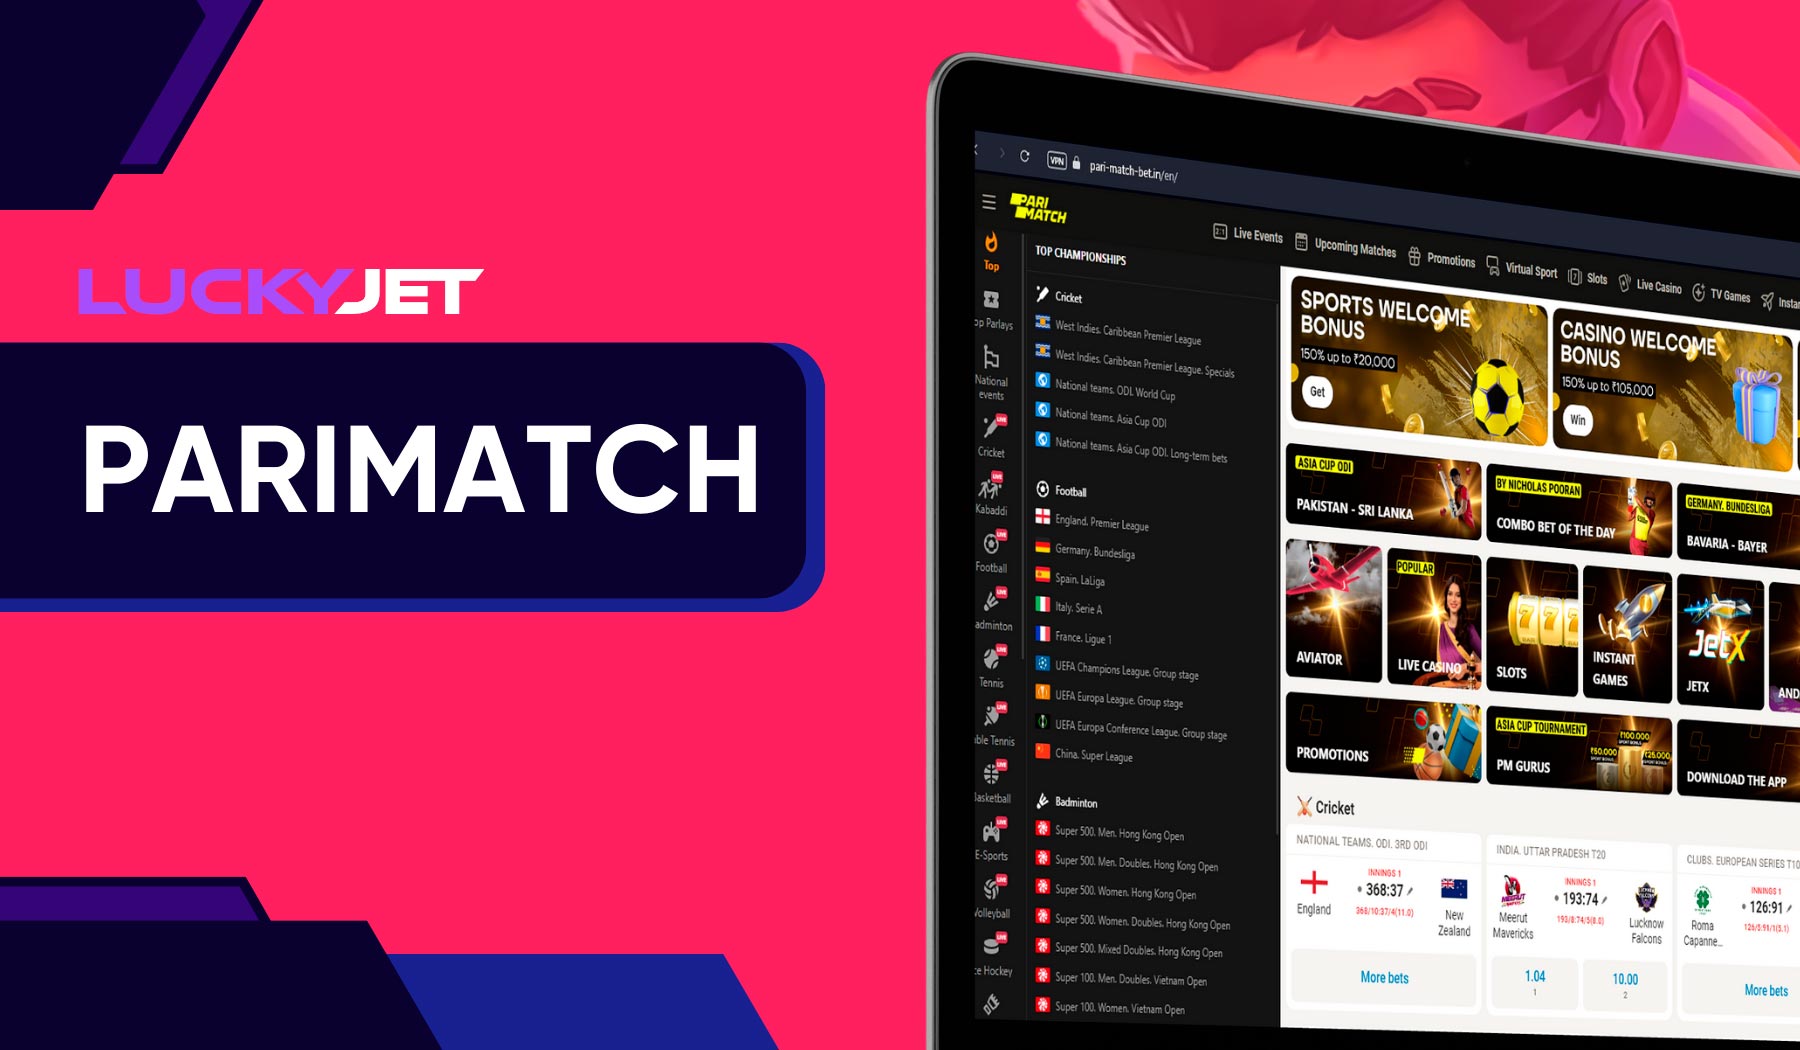 Parimatch has introduced its new sensation for the Indian market: Lucky Jet